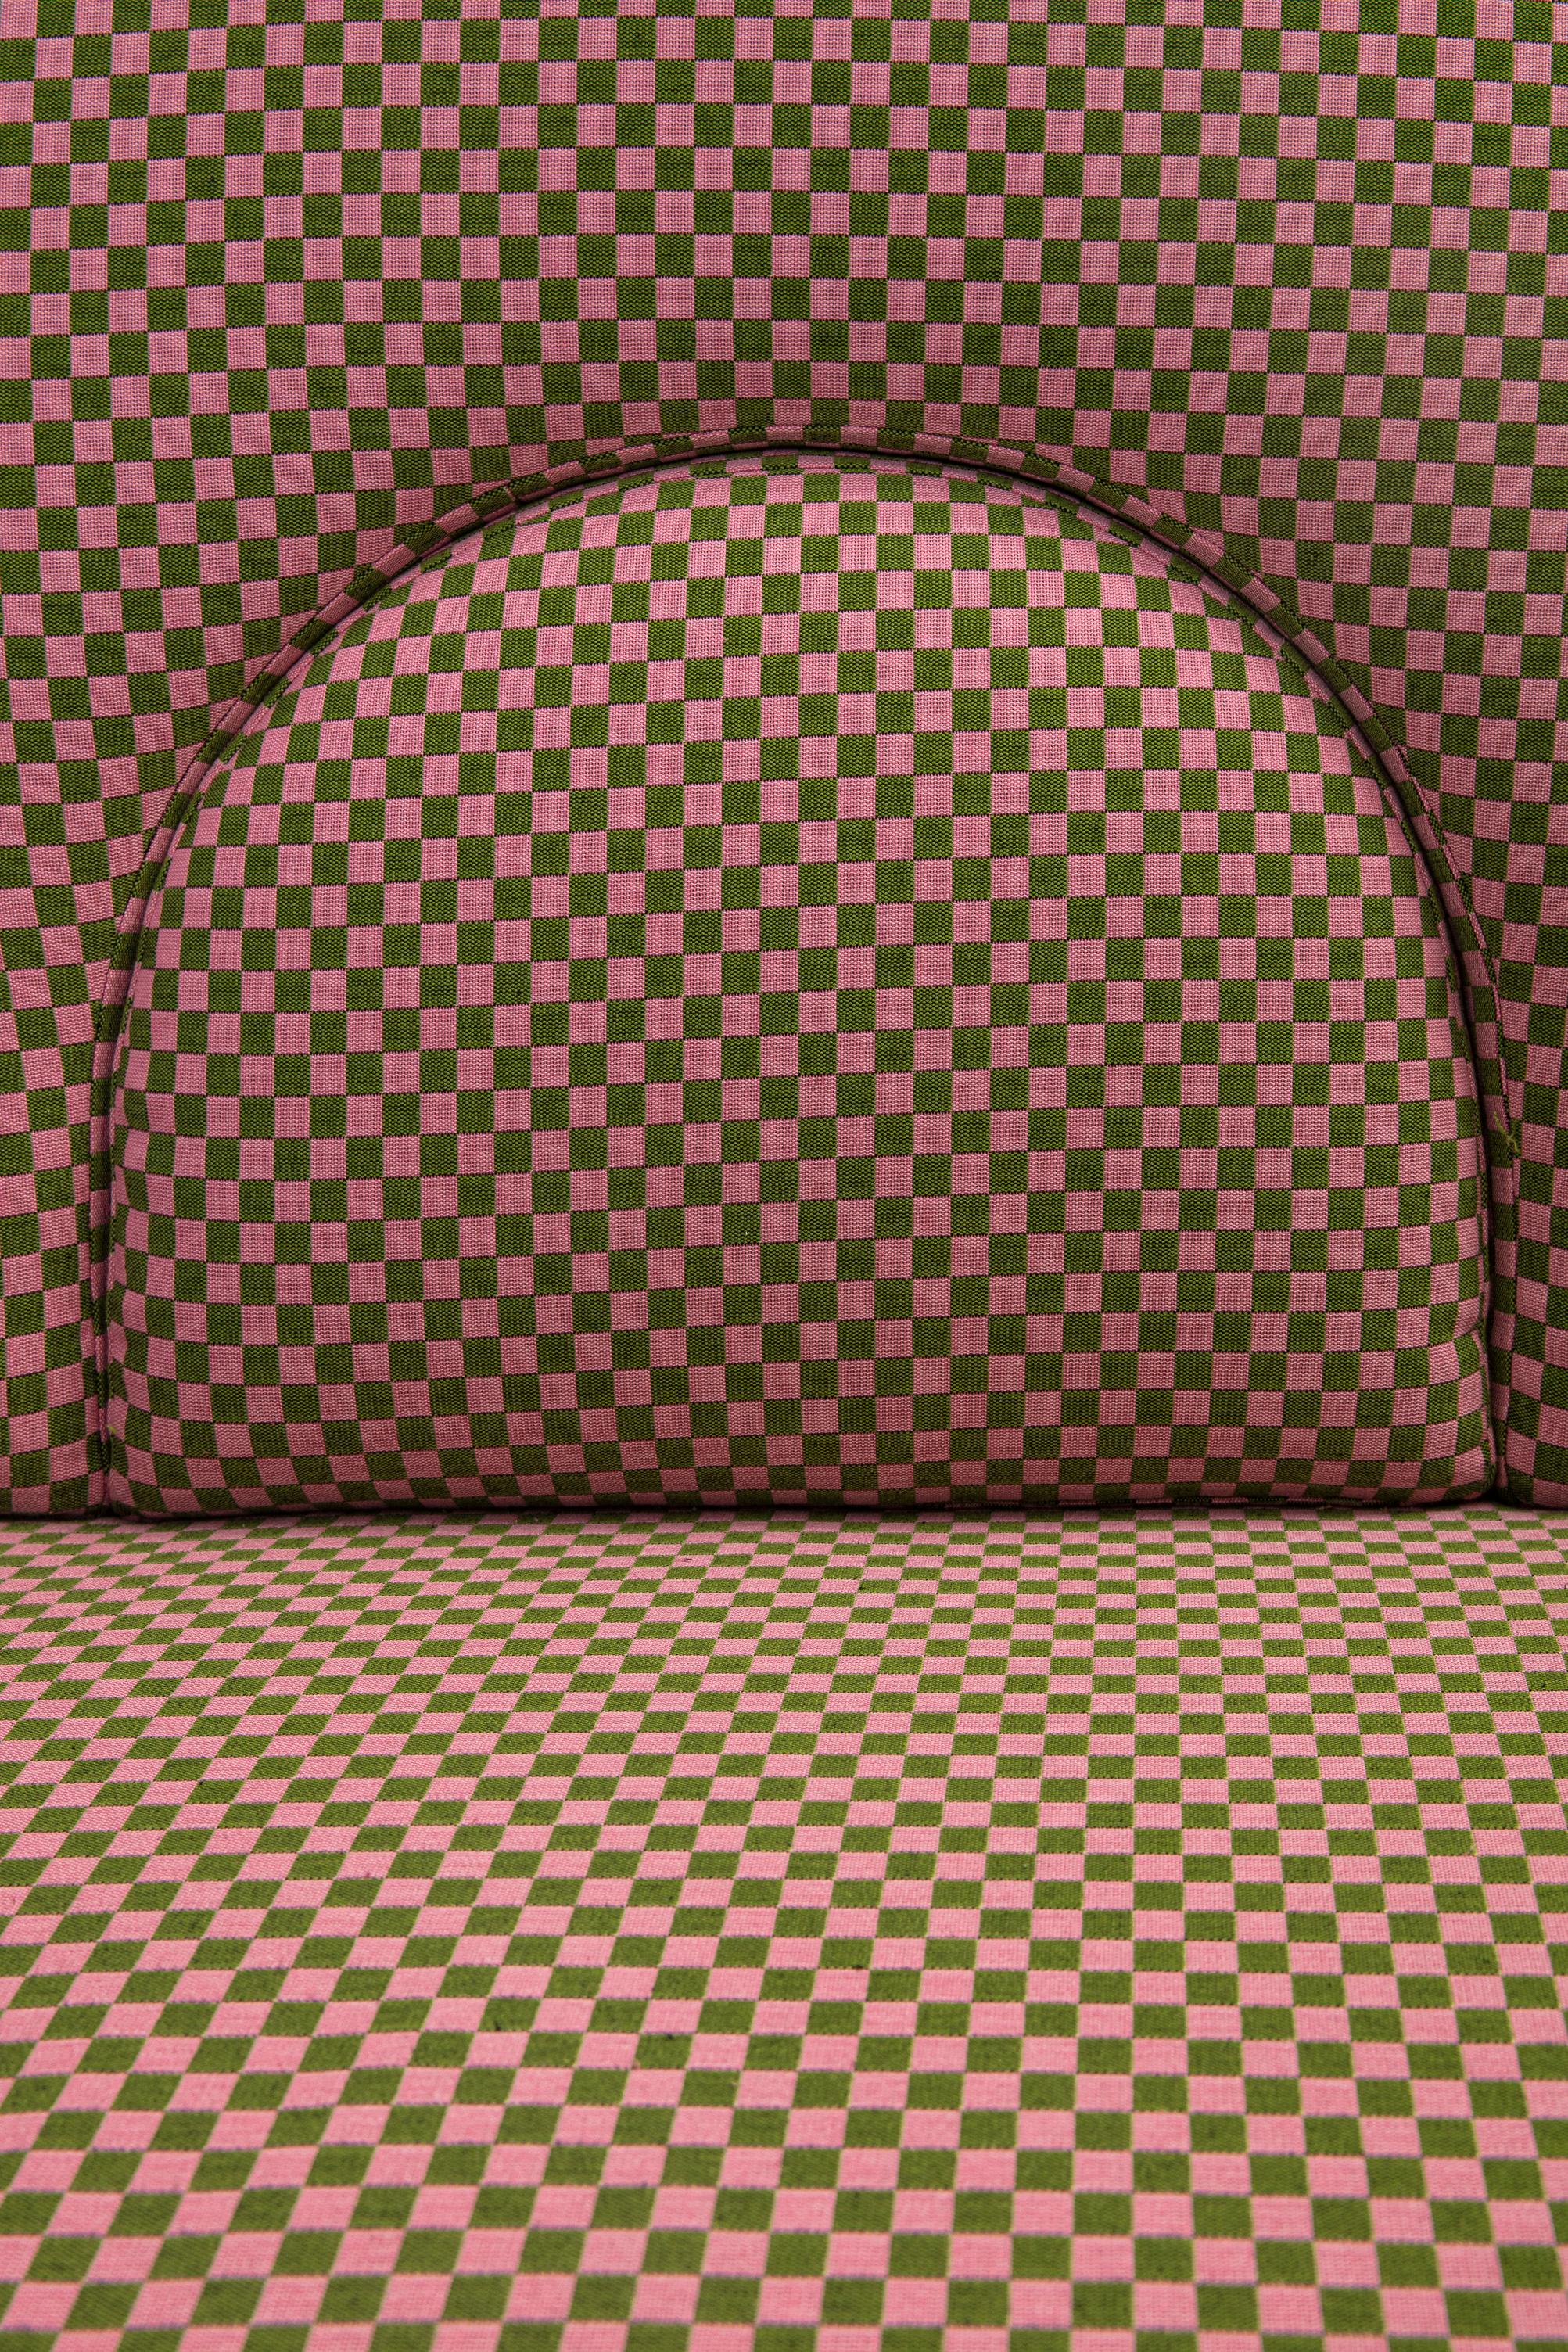 N-Gene Armchair with Green Checker Fabric and Purple Leather For Sale 2